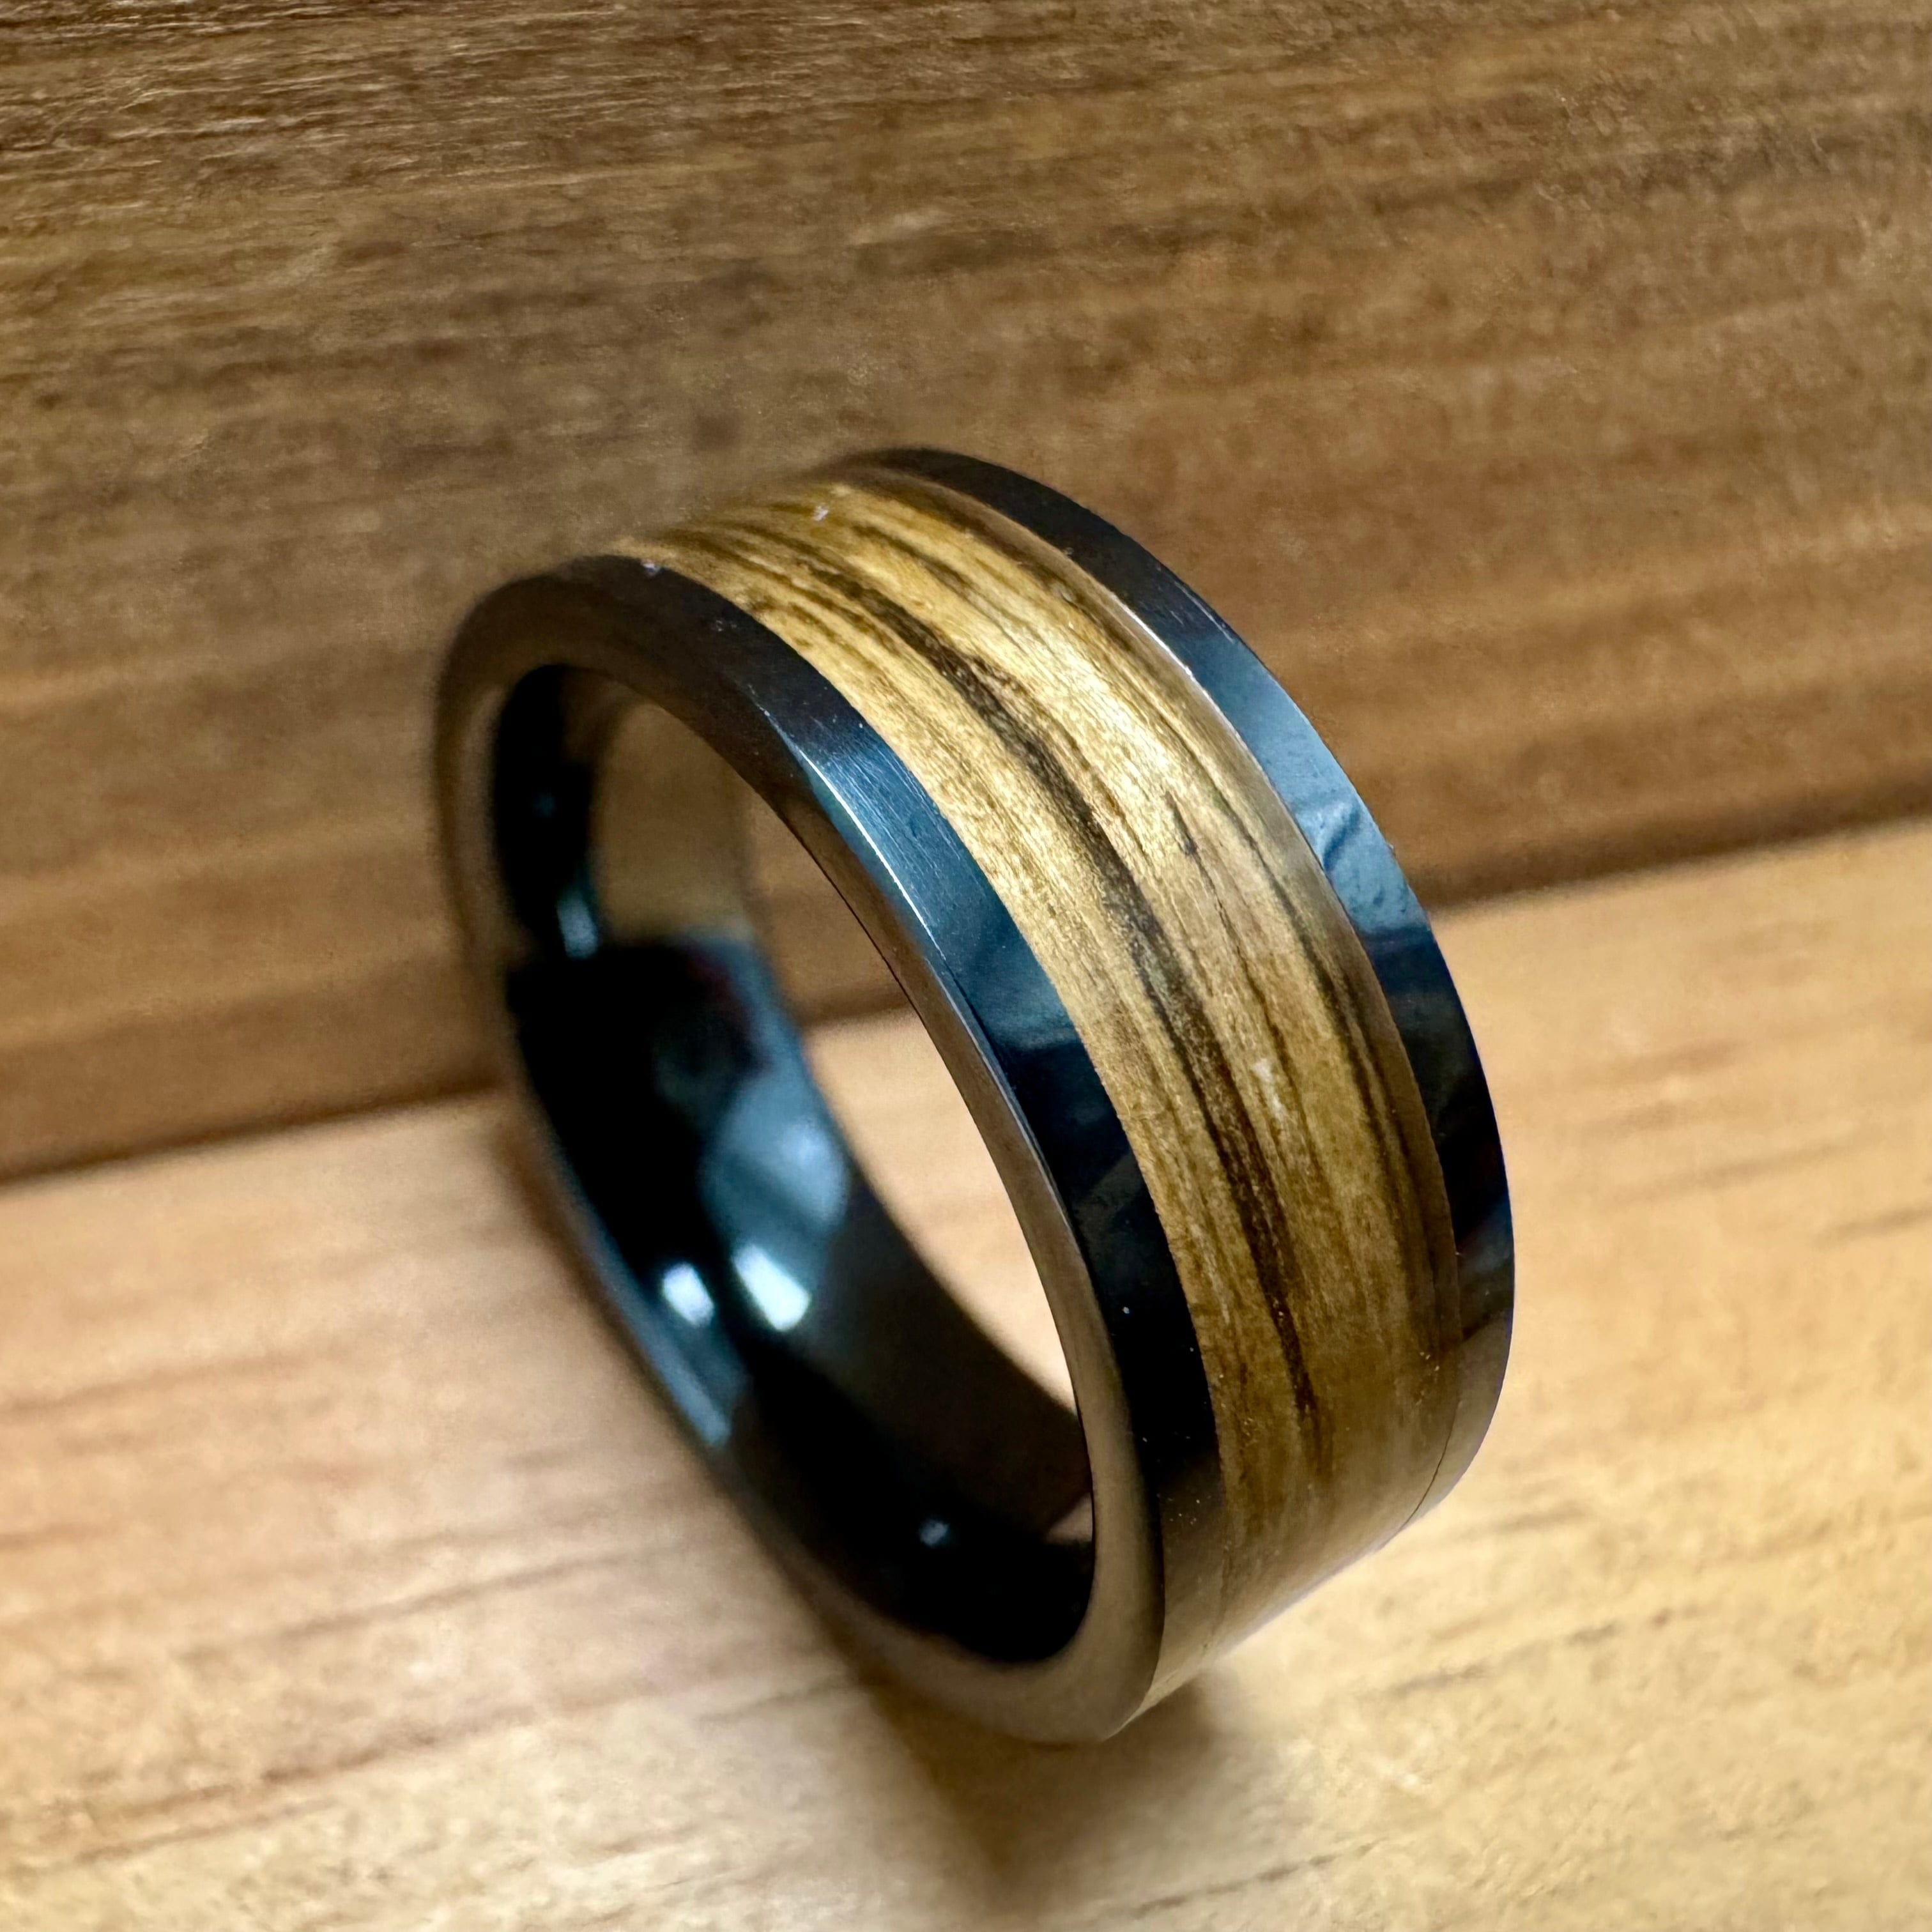 BW James Jewelers ALT Wedding Band “The Bourbon” 100% USA Made Build Your Own Ring Black Diamond Ceramic Pipe Cut 8mm High Polish Ring